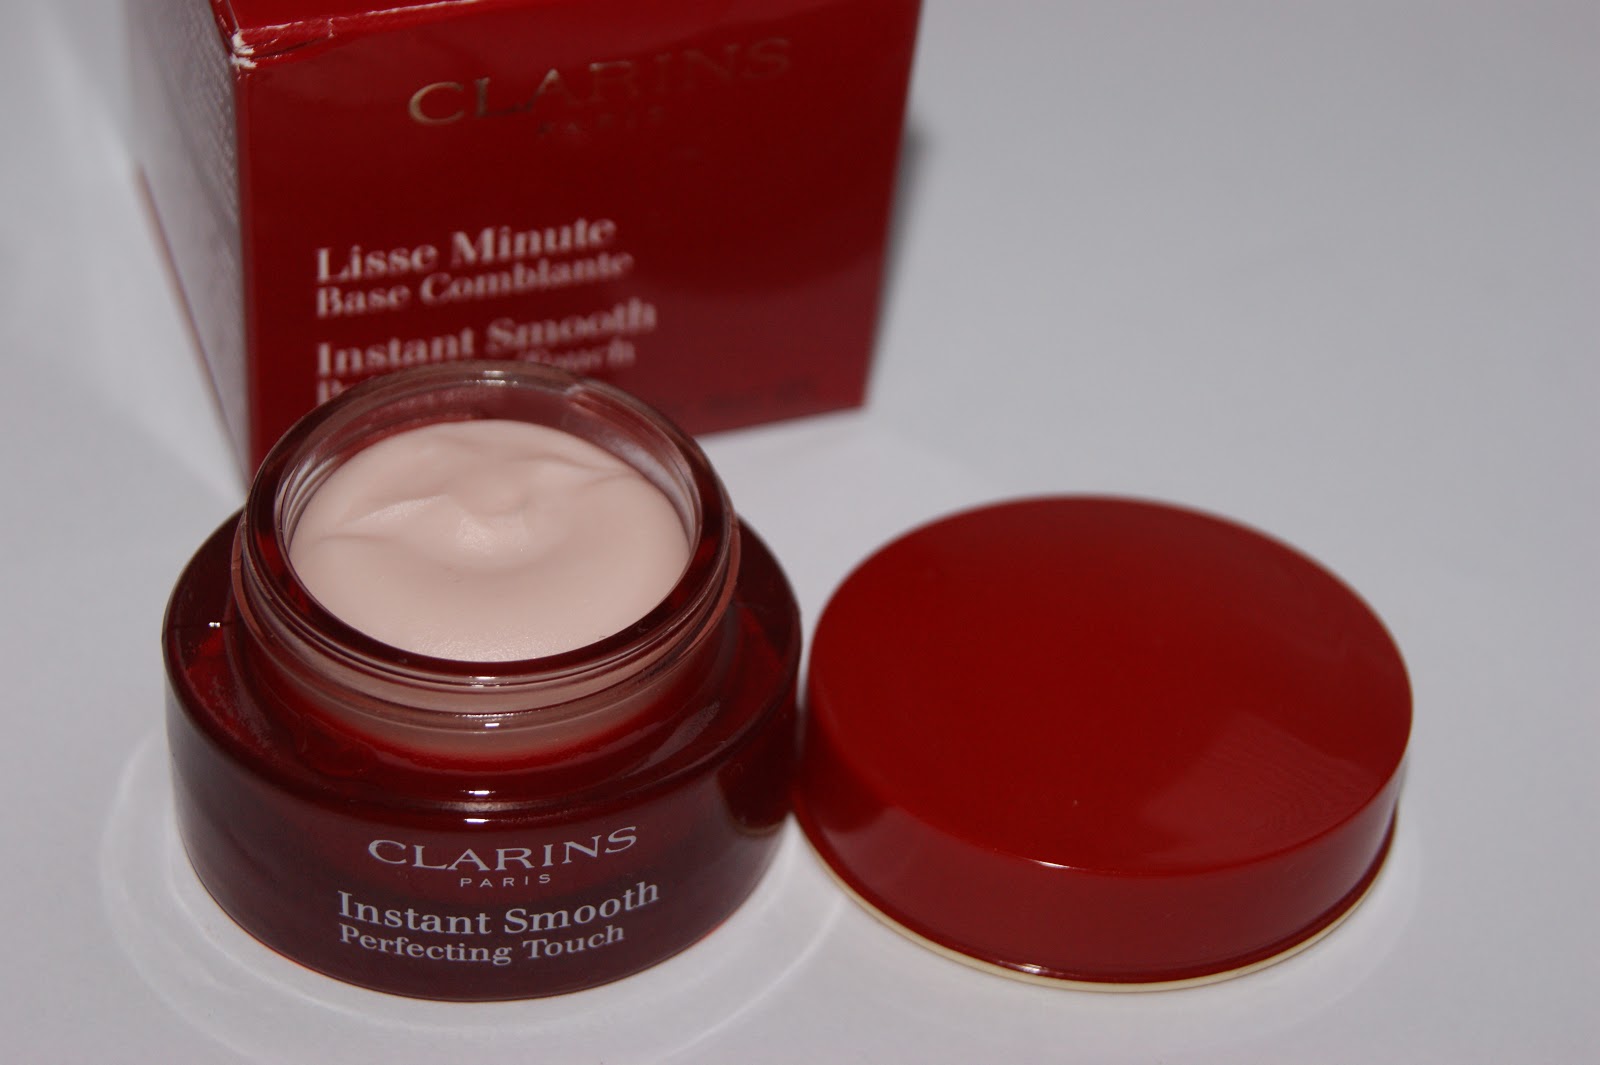 Clarins Instant Smooth Perfecting Touch - wide 10